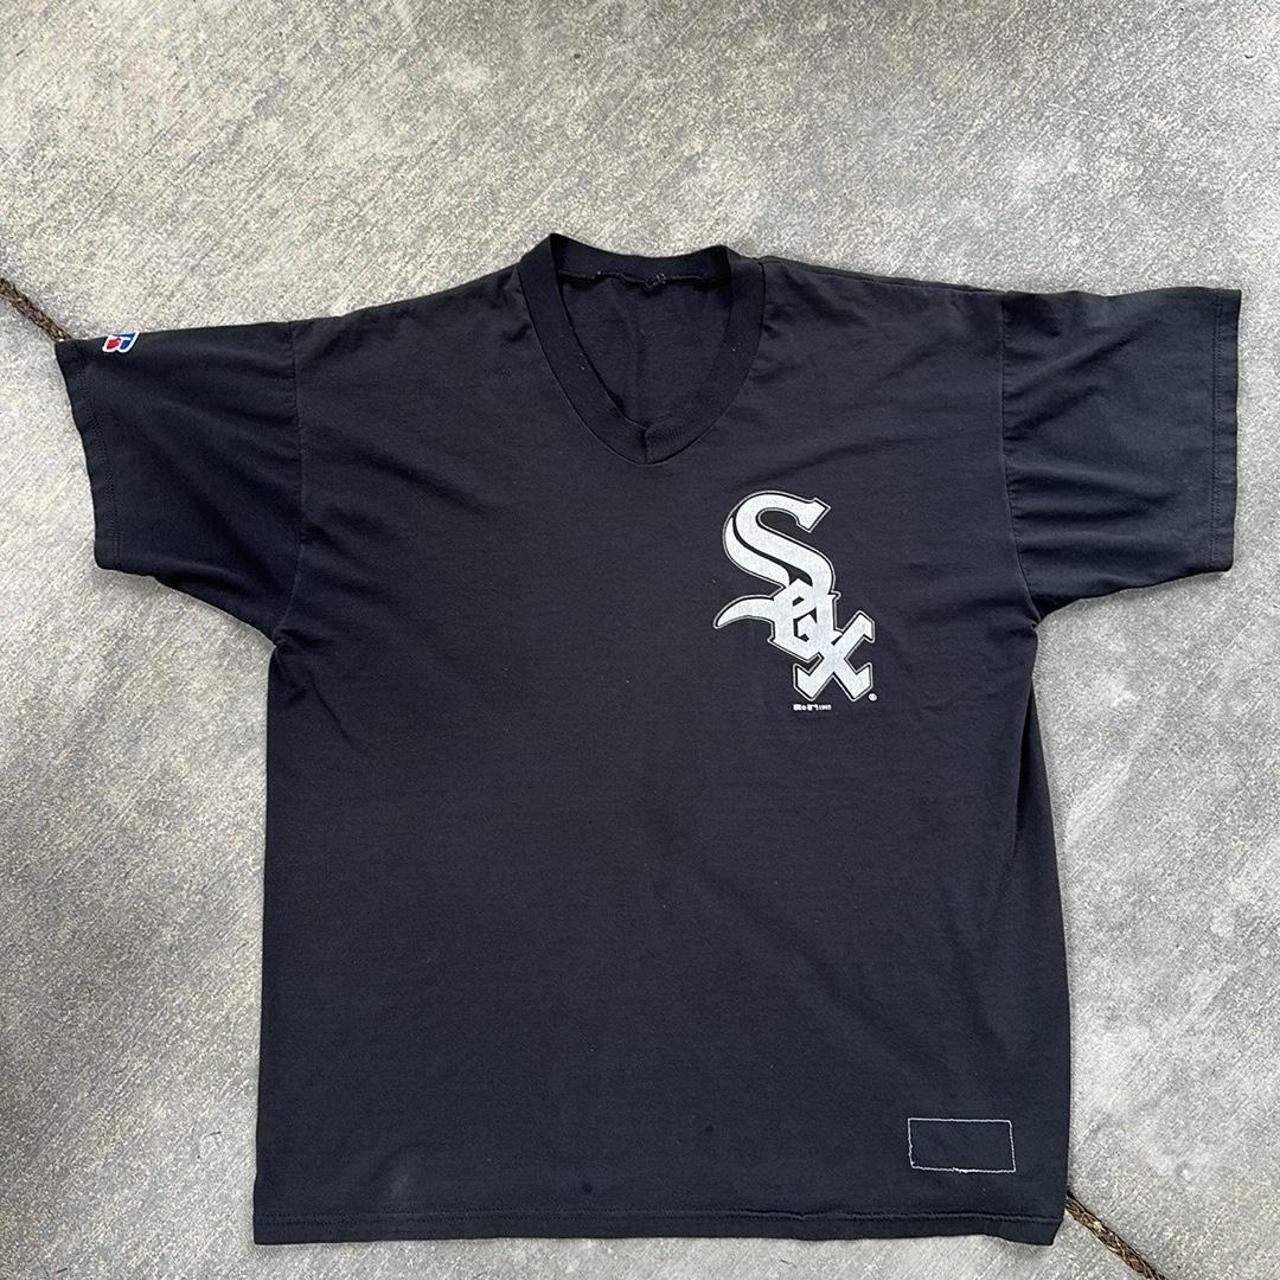 Chicago White Sox Russell Athletic Vintage Baseball Jersey 